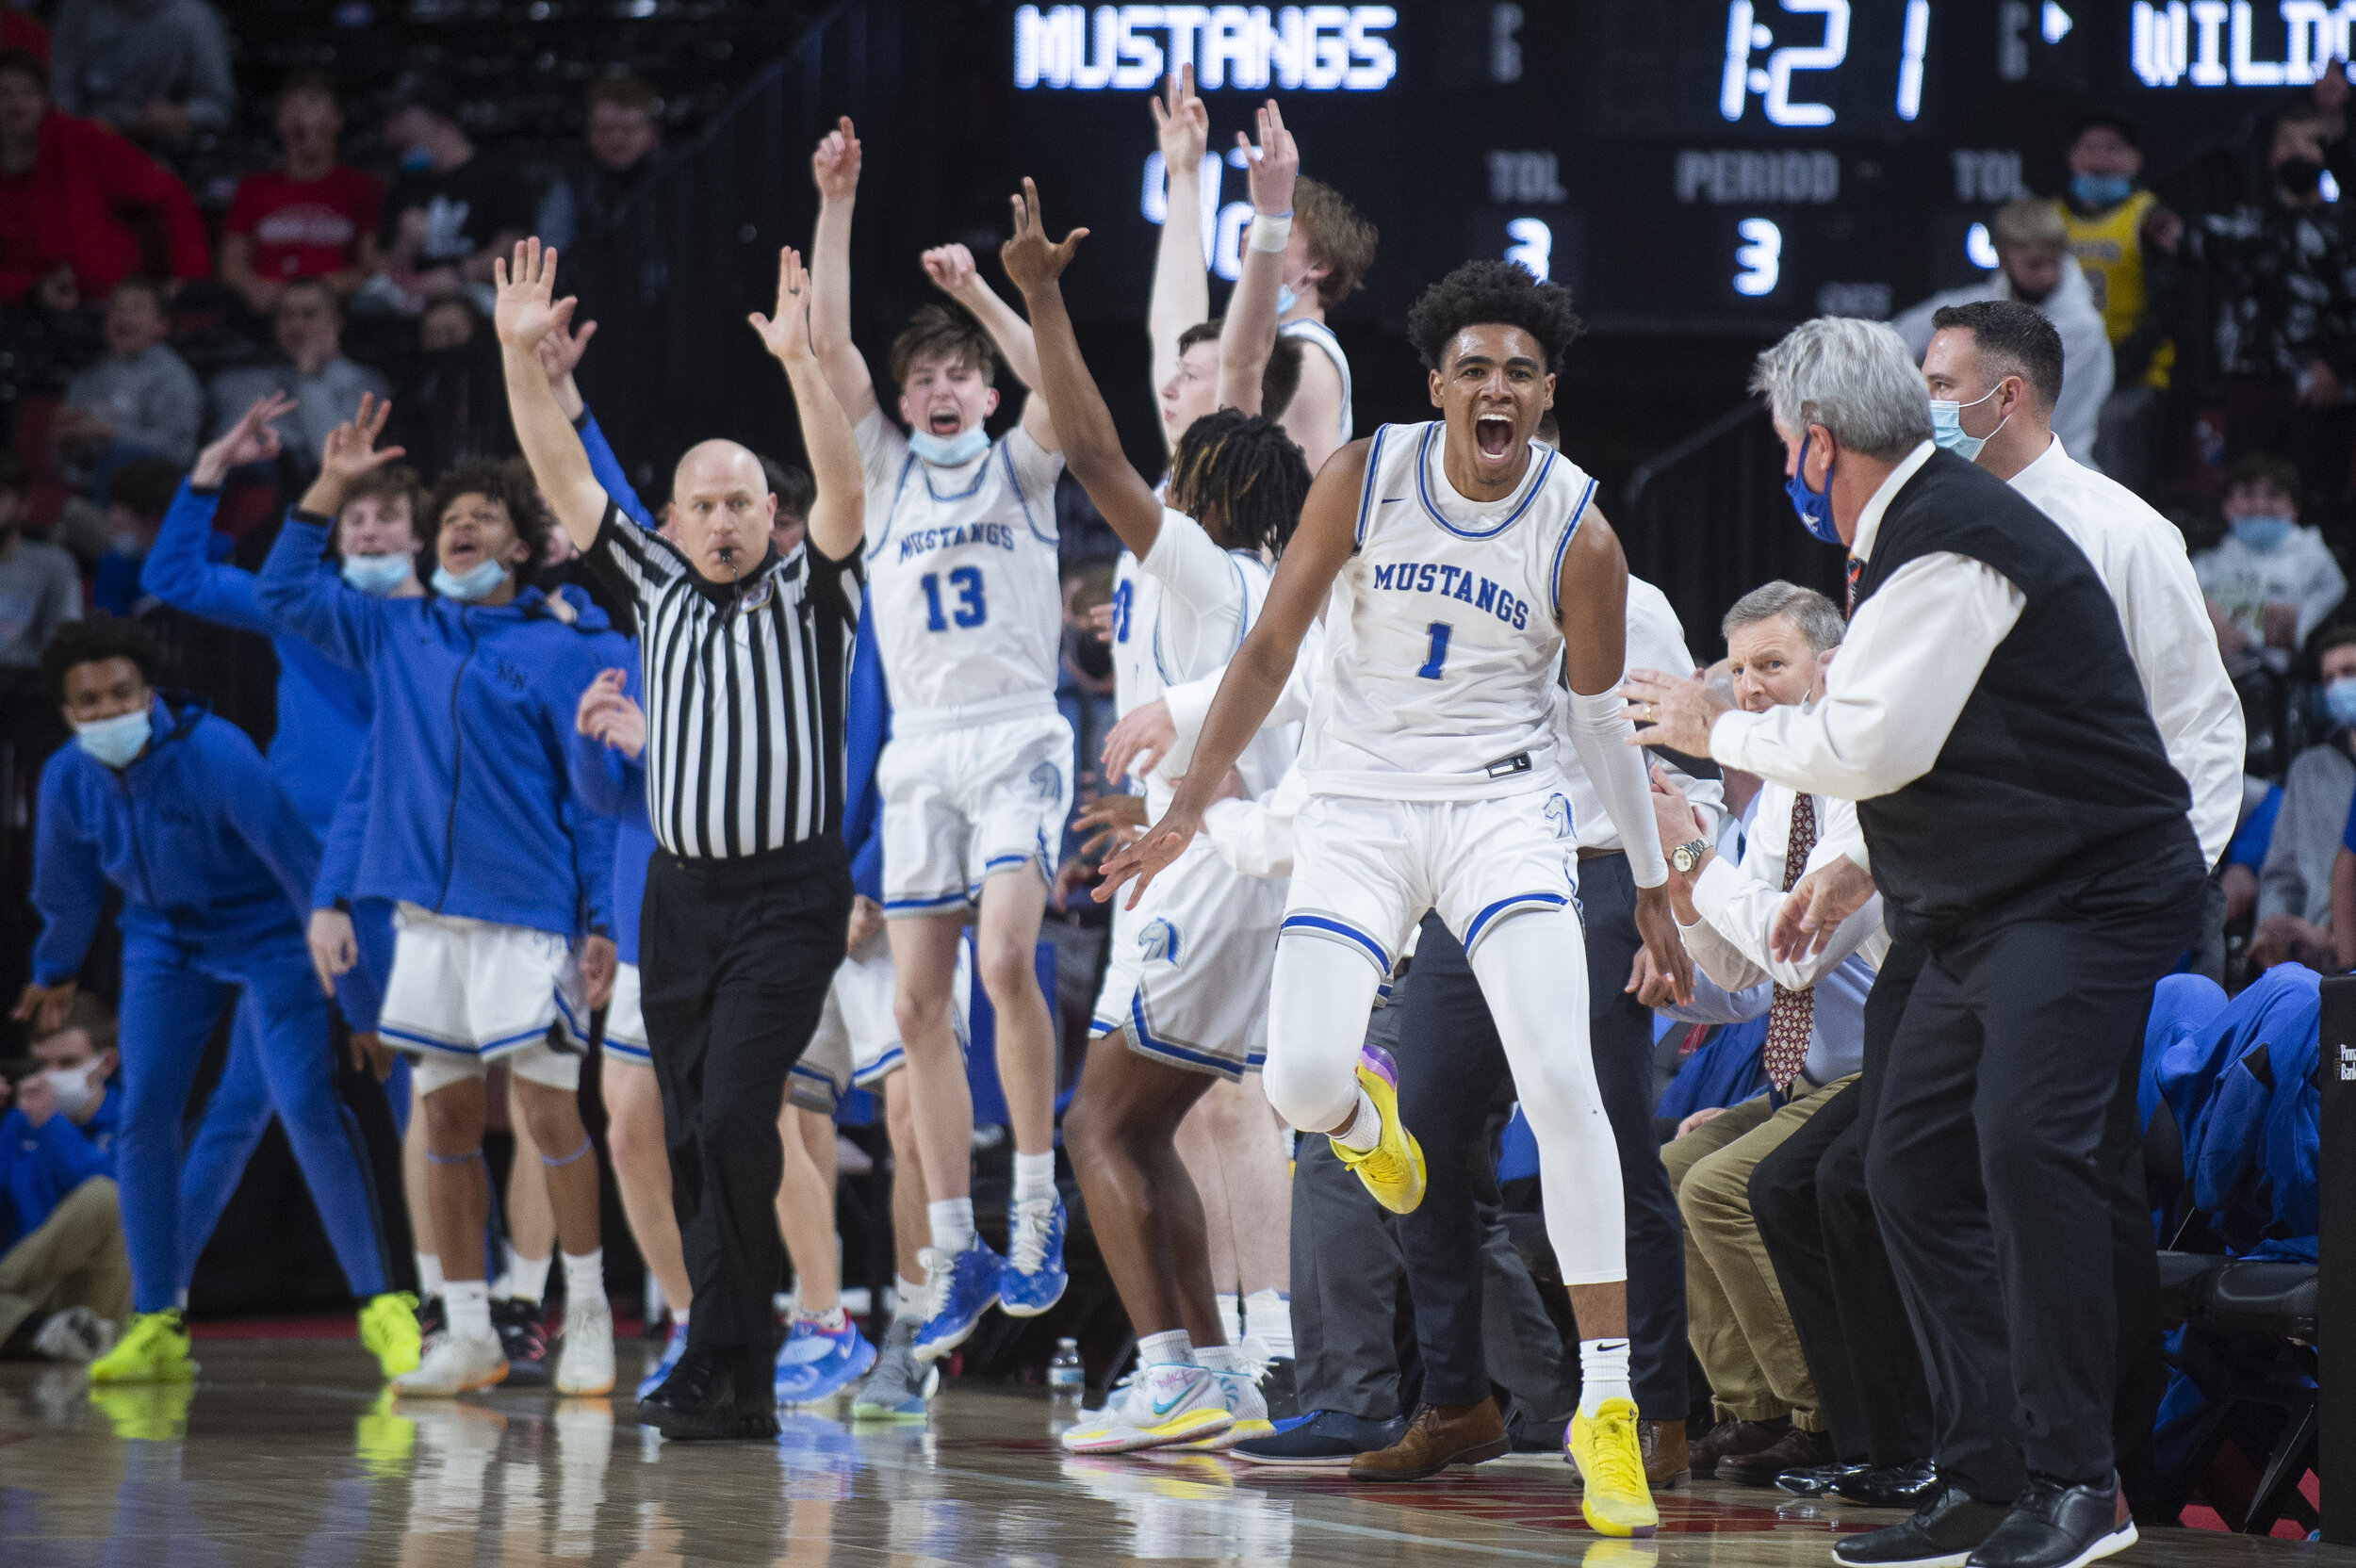  Millard North's Saint Thomas (1) dances down the sideline after hitting yet another three-point shot in the third quarter during a class A semifinal, Friday, March 12, 2021, at Pinnacle Bank Arena. KENNETH FERRIERA, Journal Star 